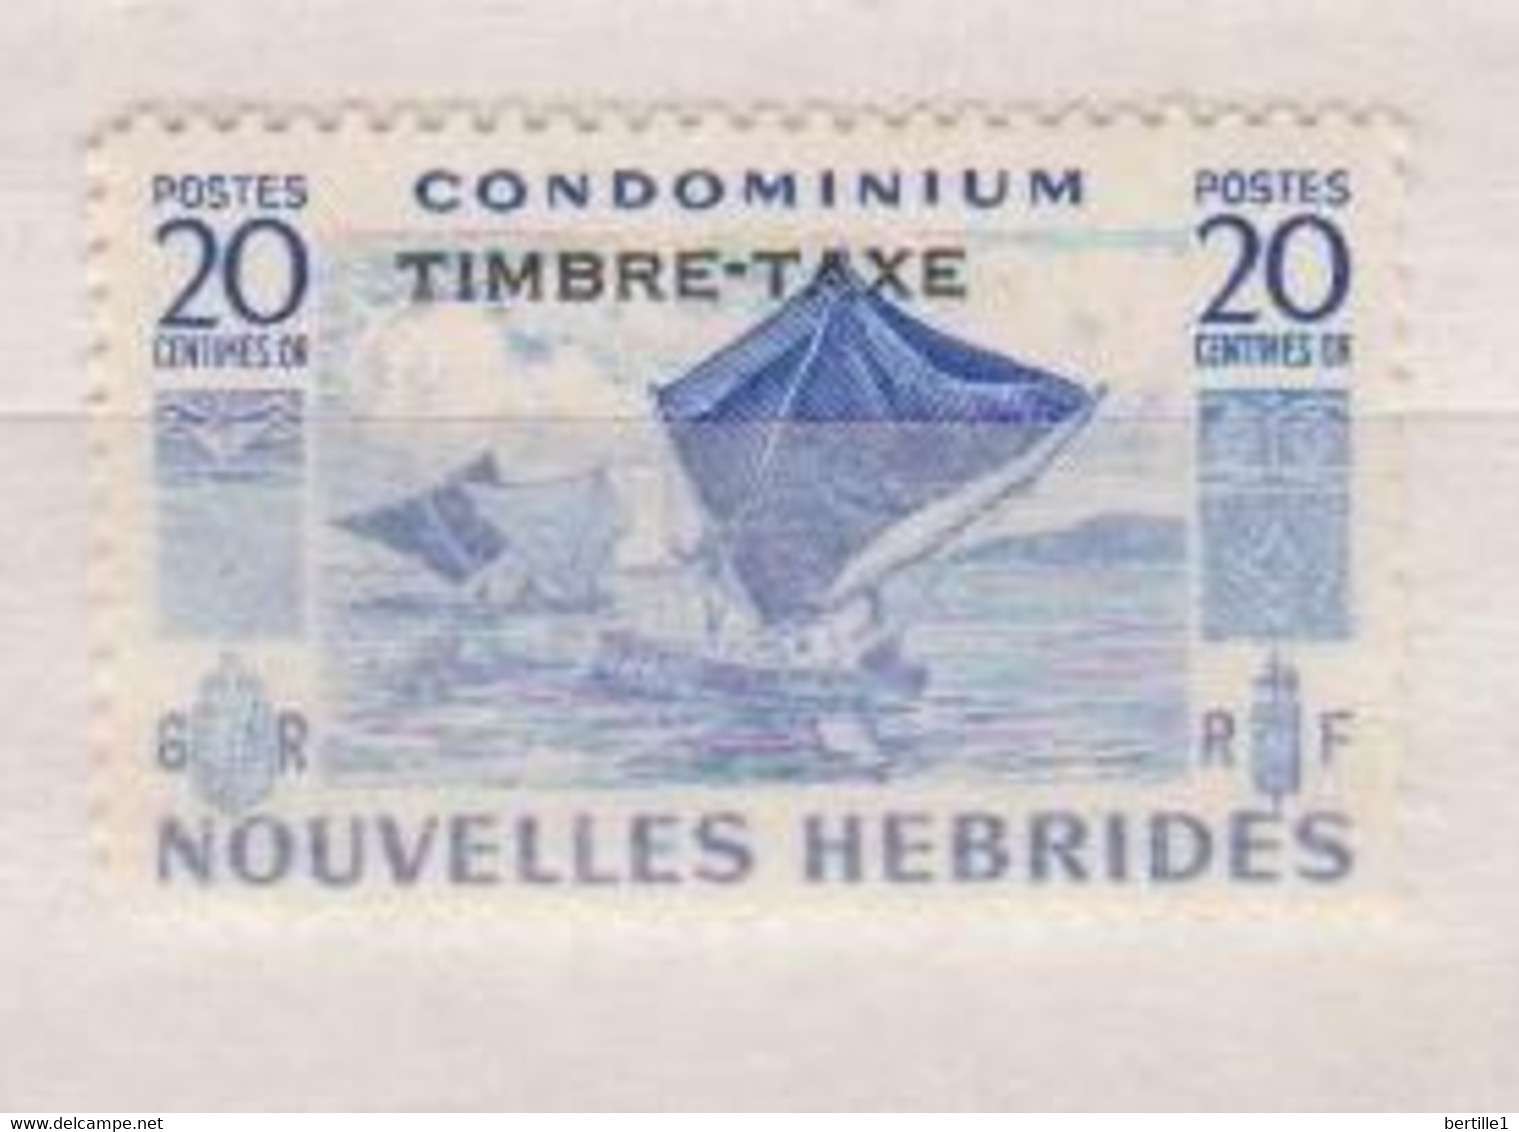 NOUVELLES HEBRIDES      N°  YVERT  : TAXE 28  NEUF AVEC  CHARNIERES      ( CH  3 / 17 ) - Postage Due